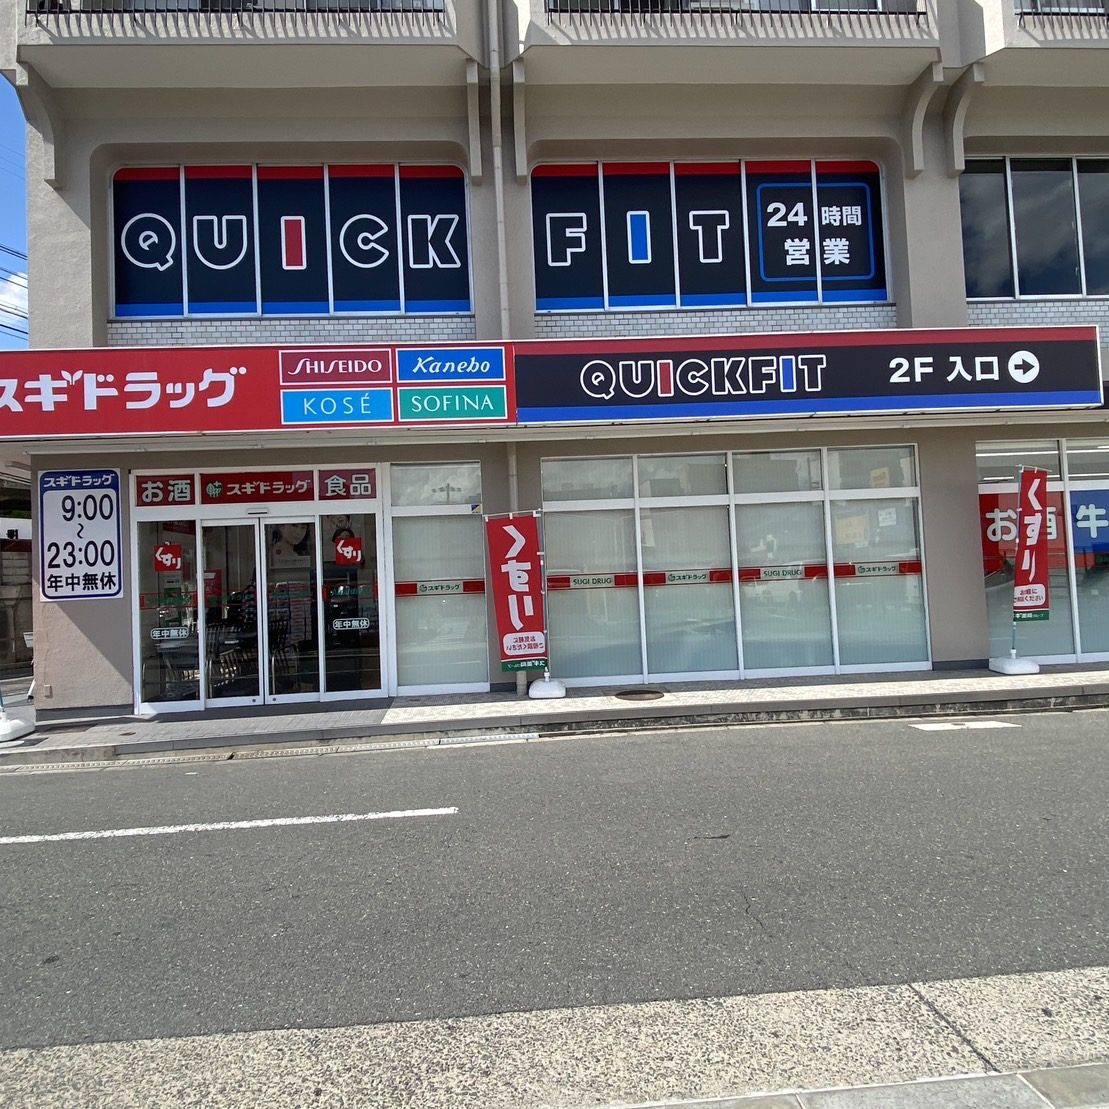 QUICK FIT 関目店様の施工事例